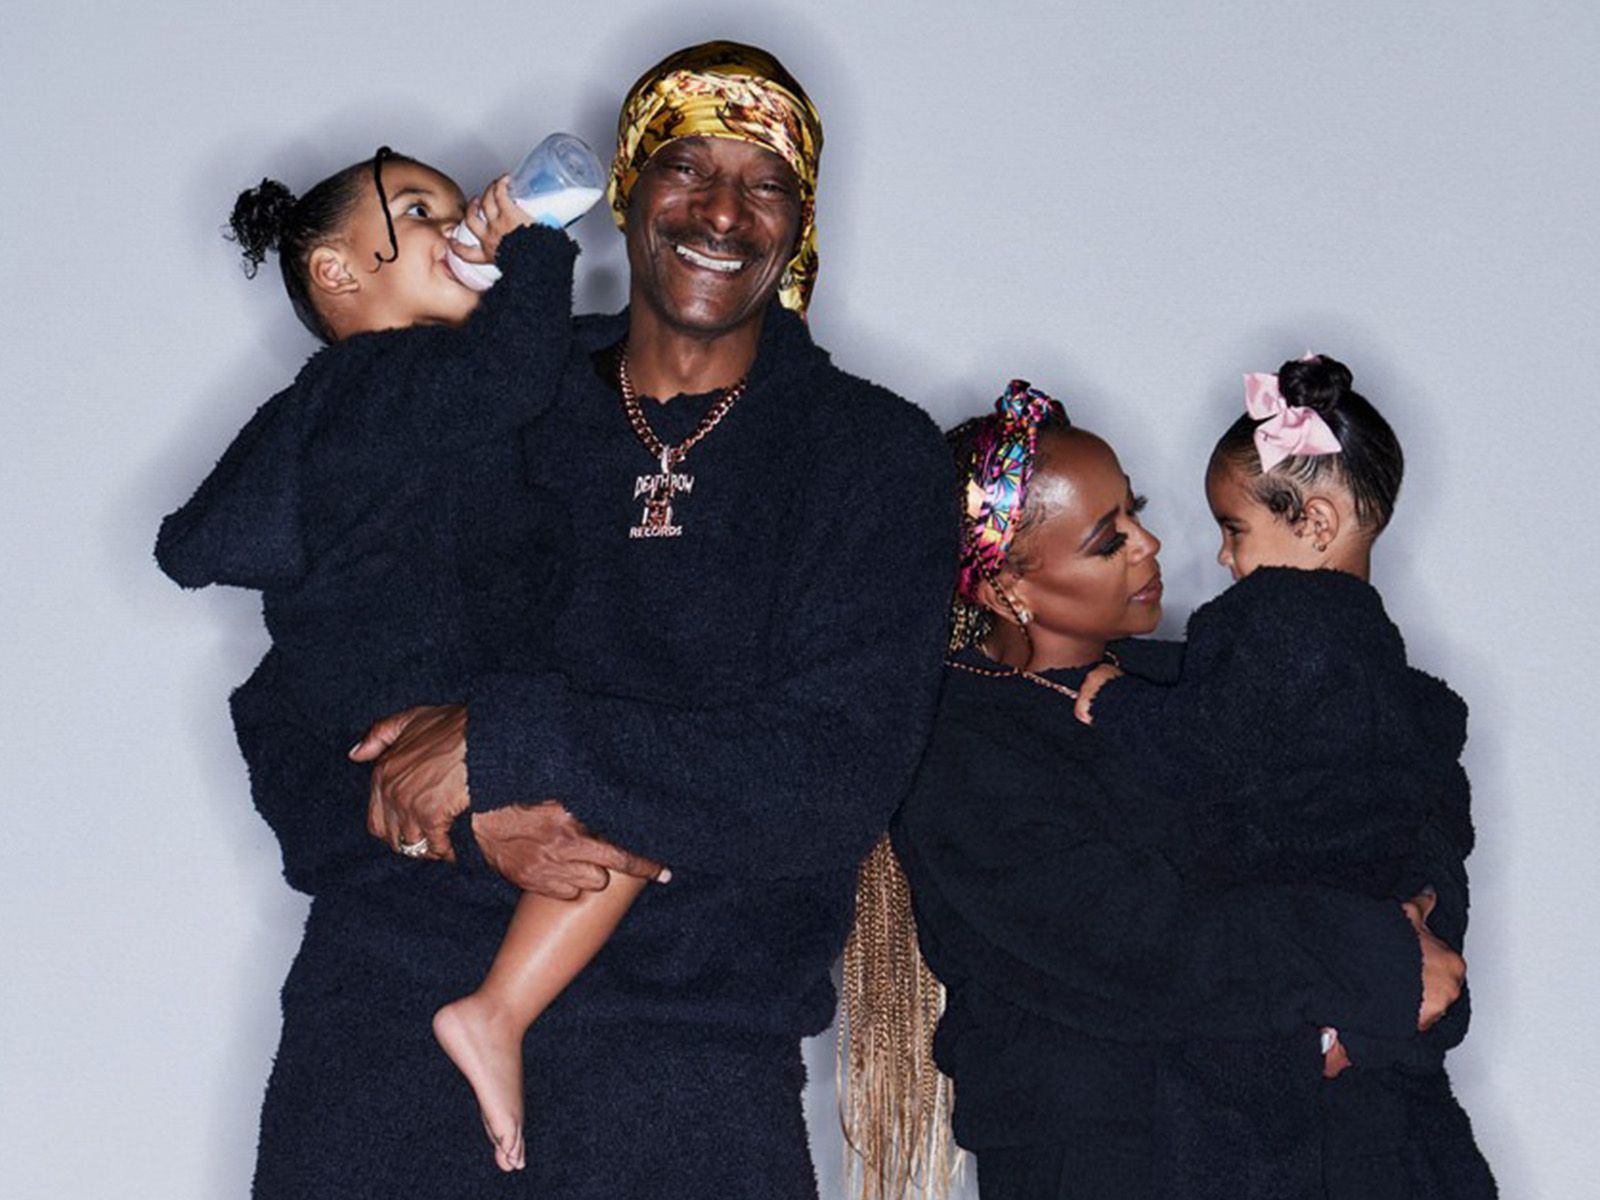 Snoop Dogg stars with his family in Skims holiday campaign